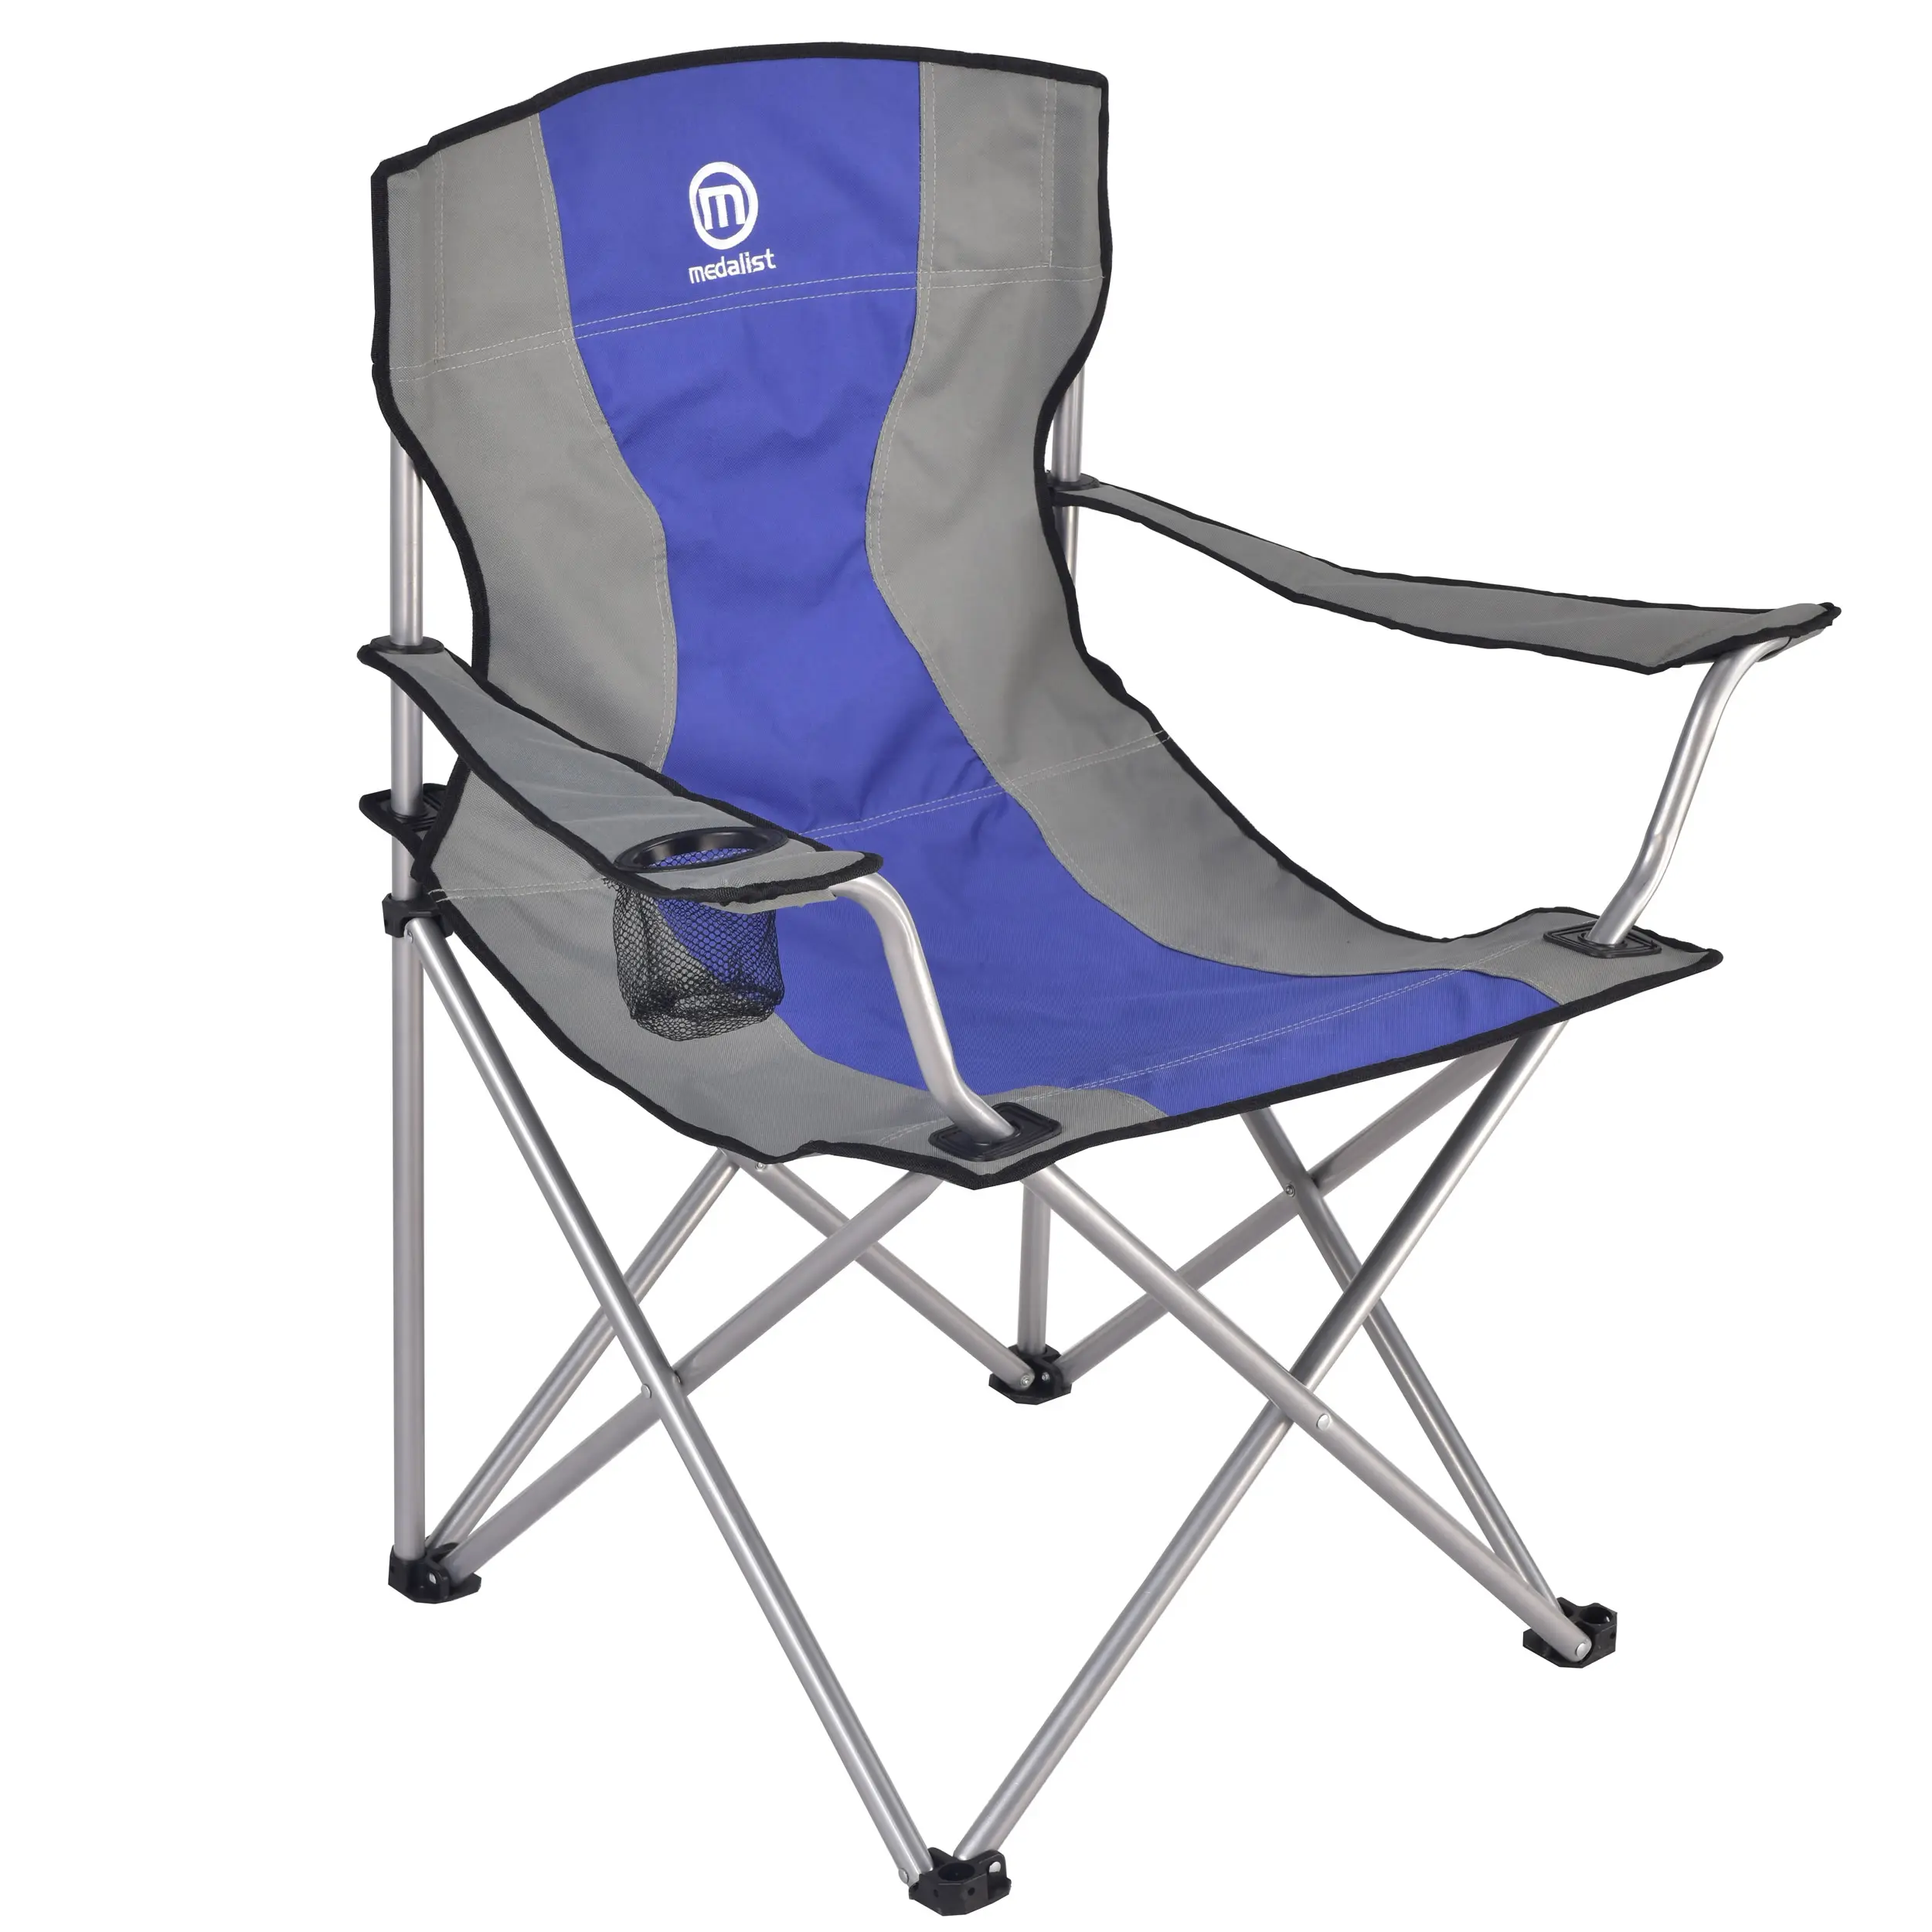 Outdoor portable folding camping colorful metal beach chair wholesale factory foldable lightweight customizable logo chairs